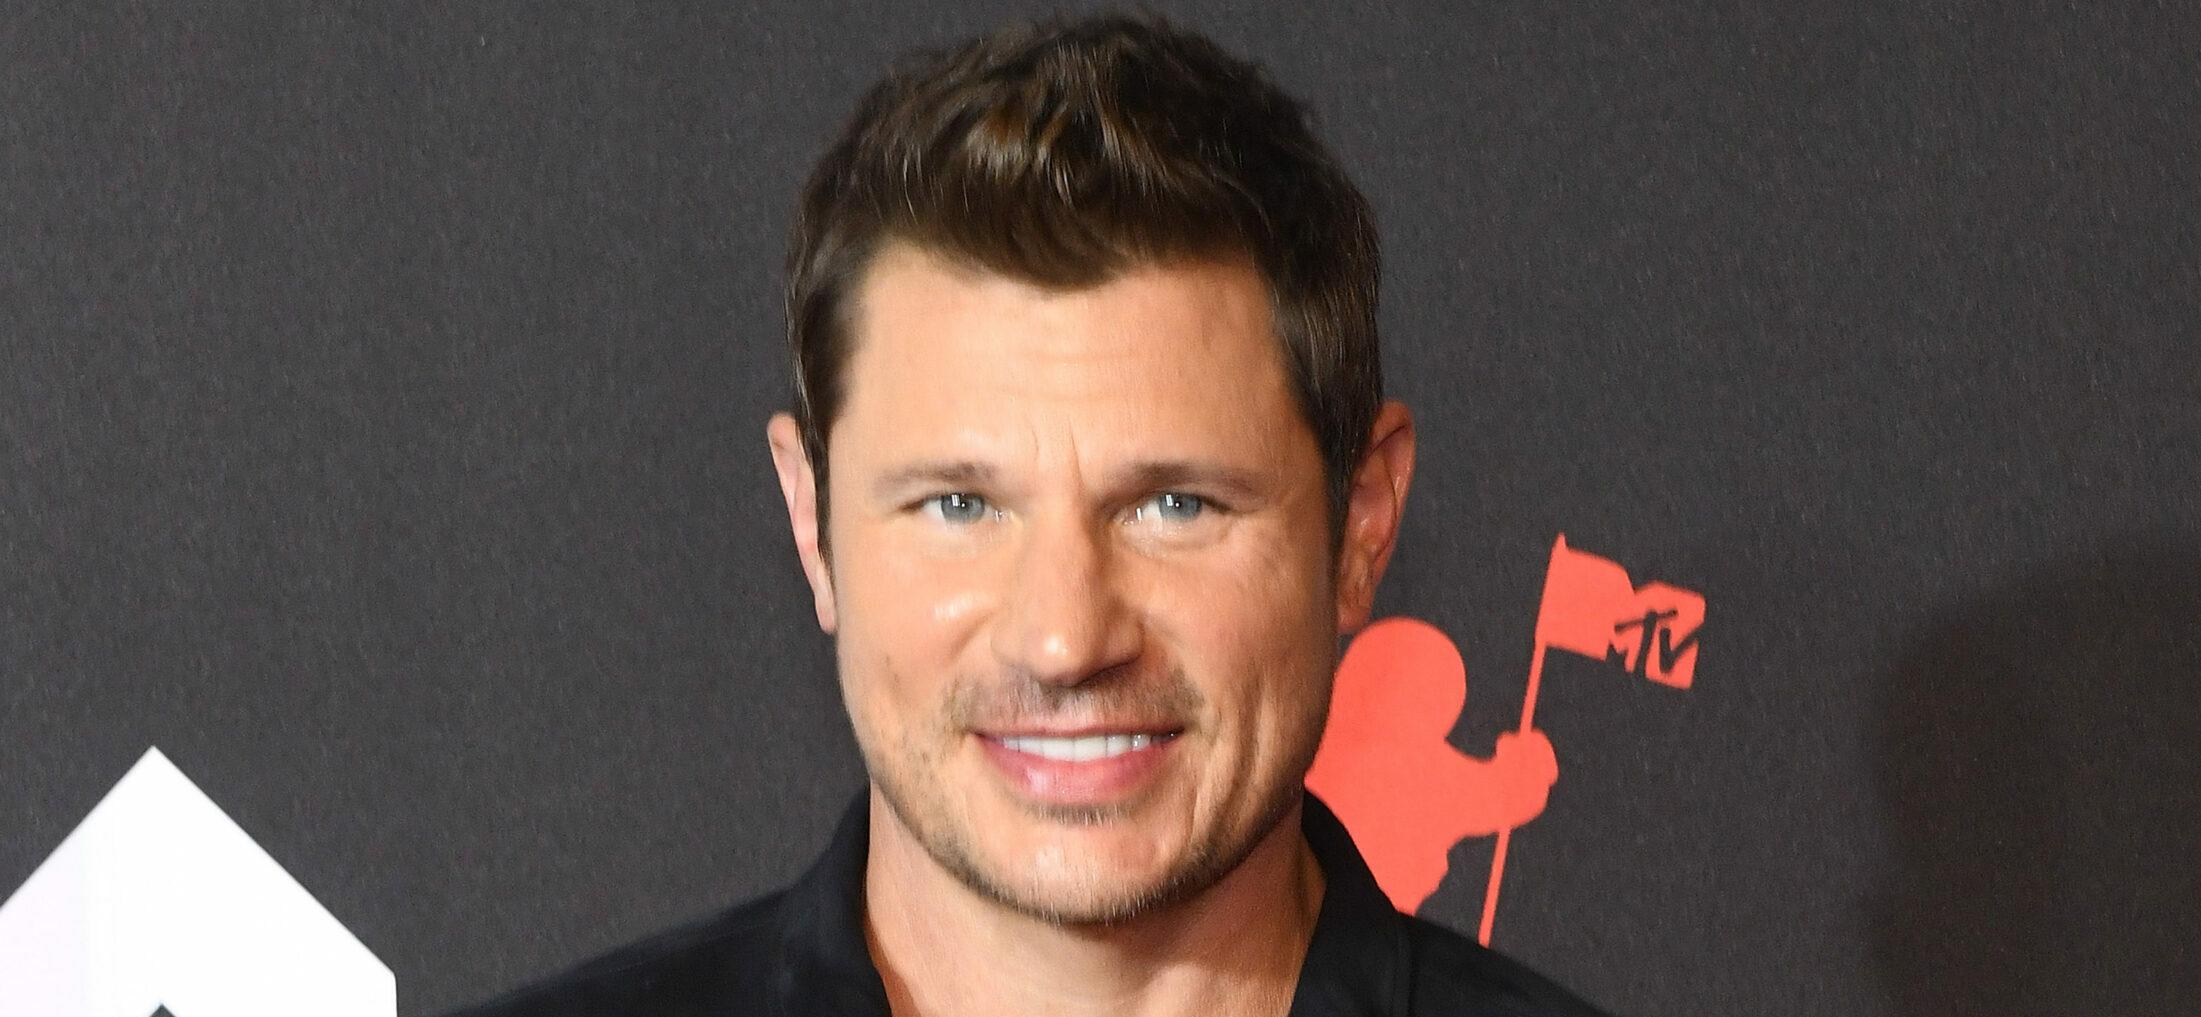 Nick Lachey Ordered To Take Anger Management Classes After Violent Altercation With Paparazzo